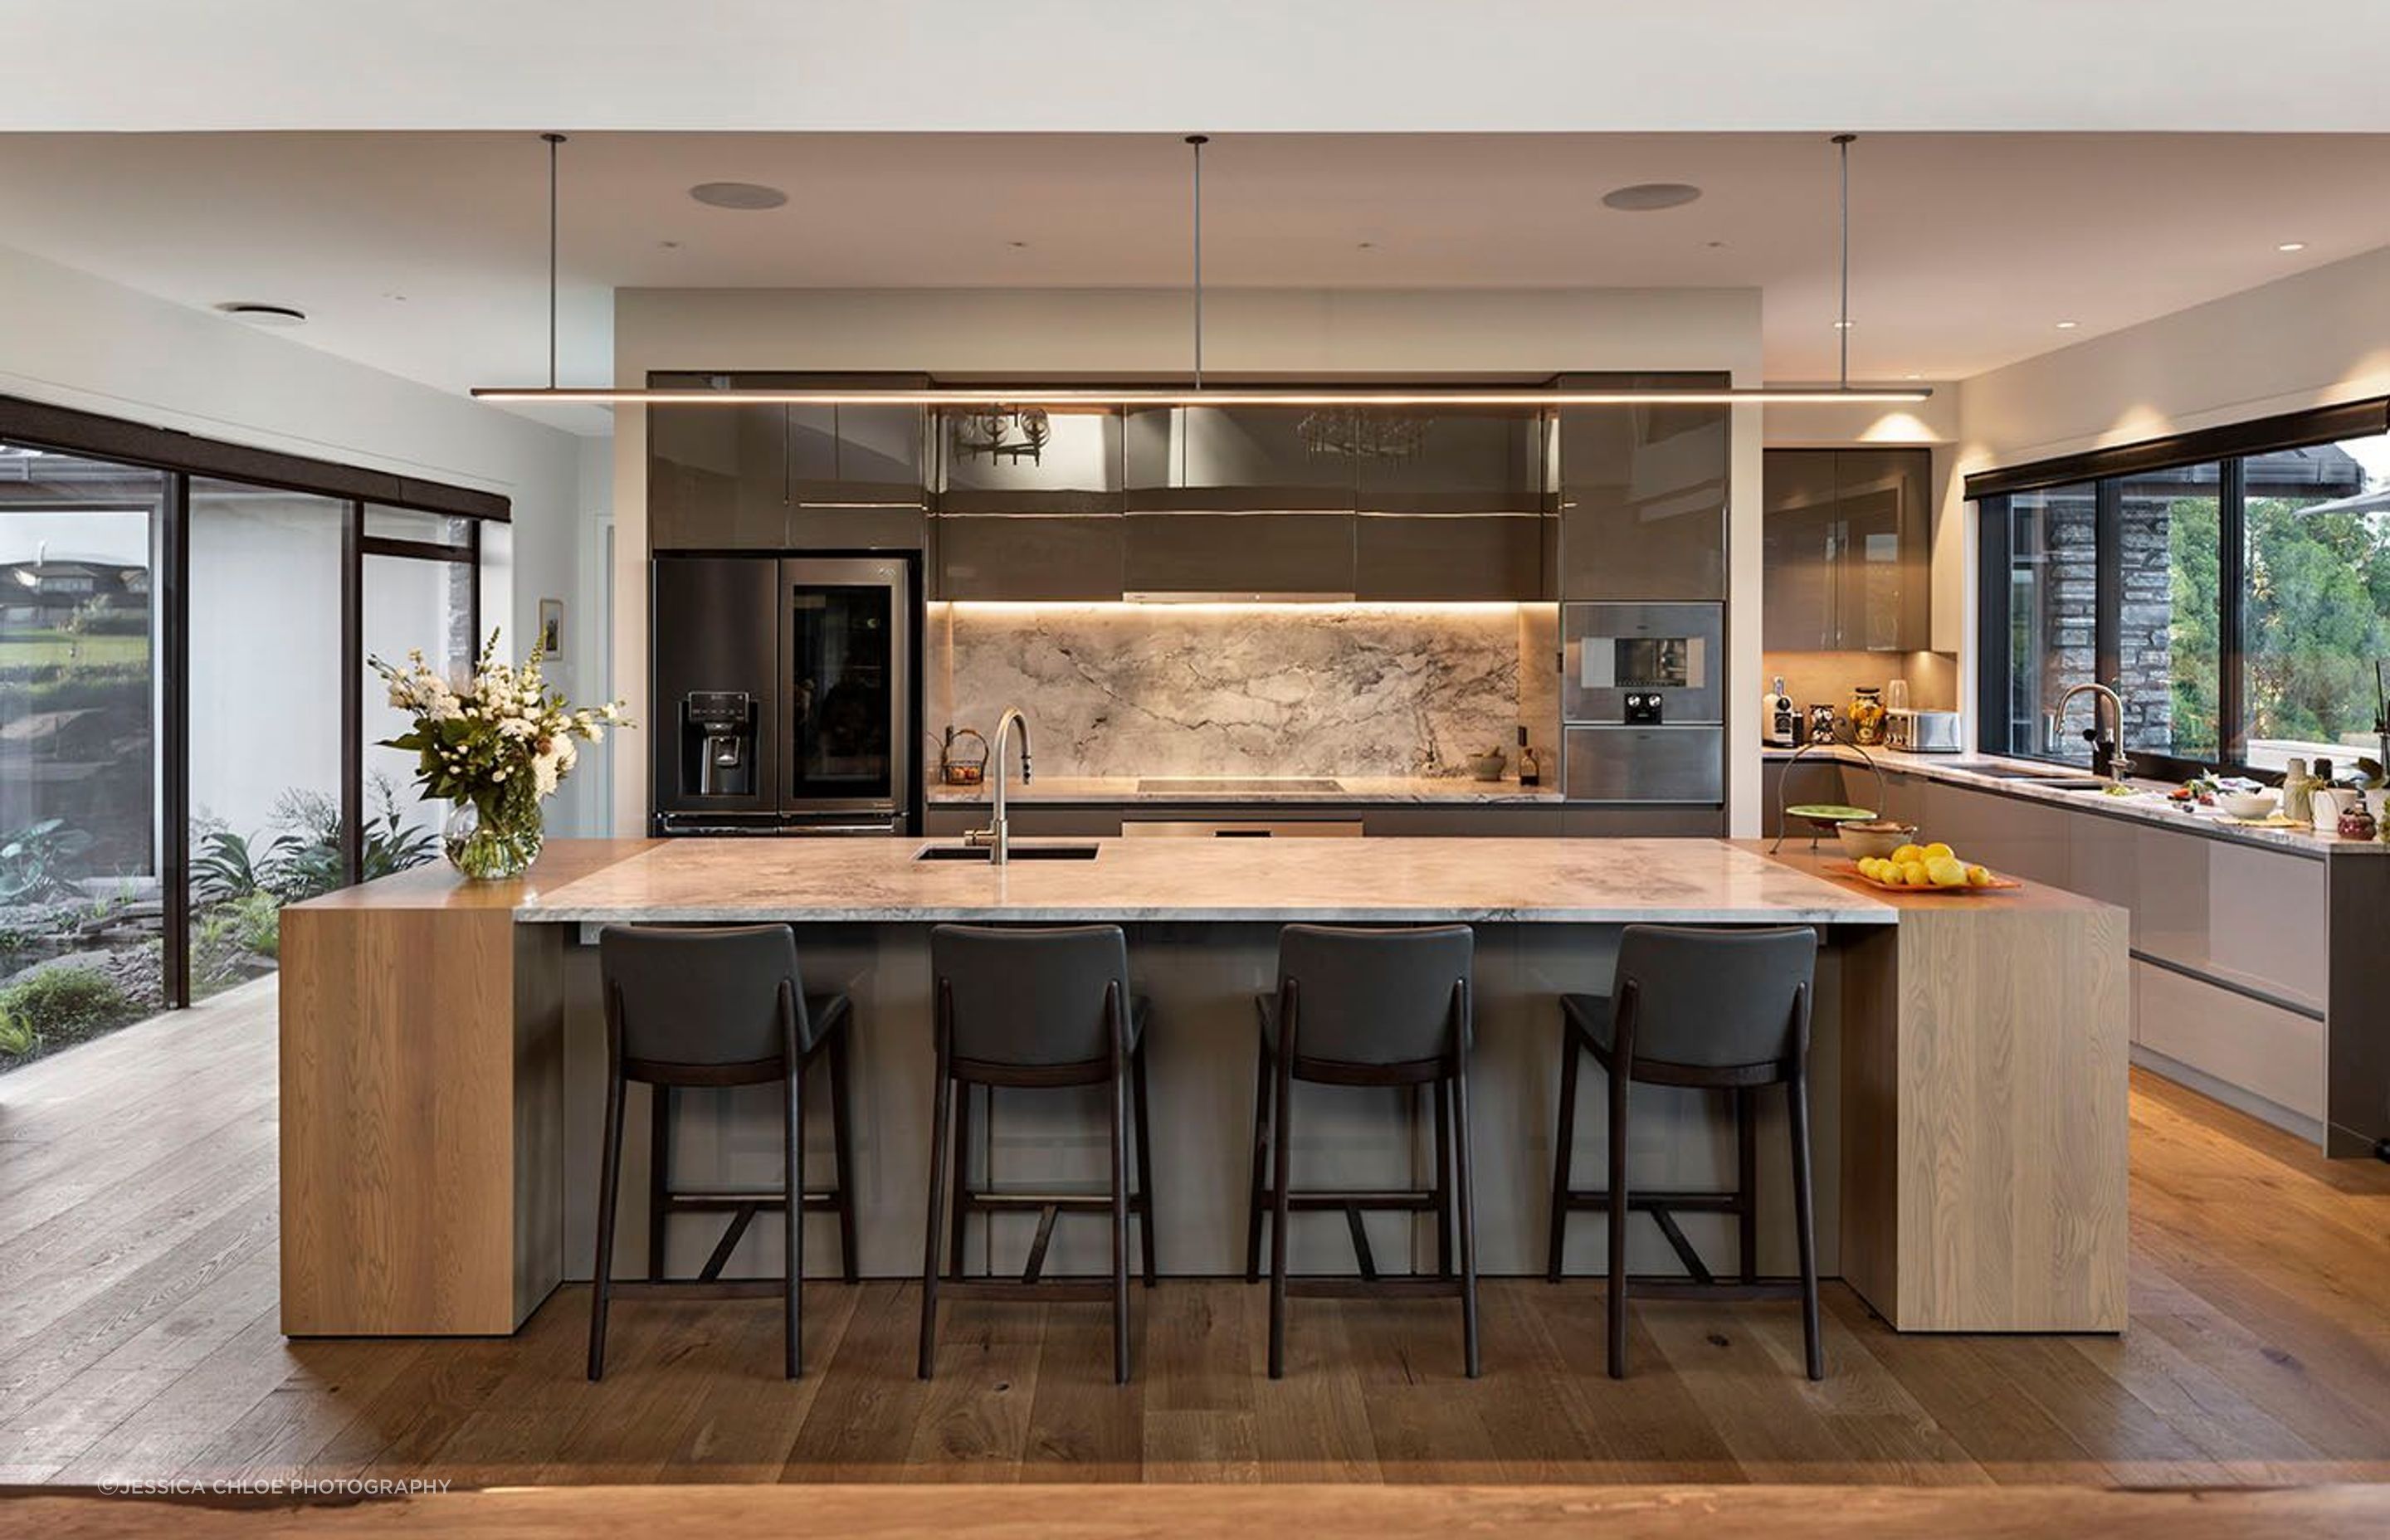 An open kitchen designed for entertaining when the whole family gathers.